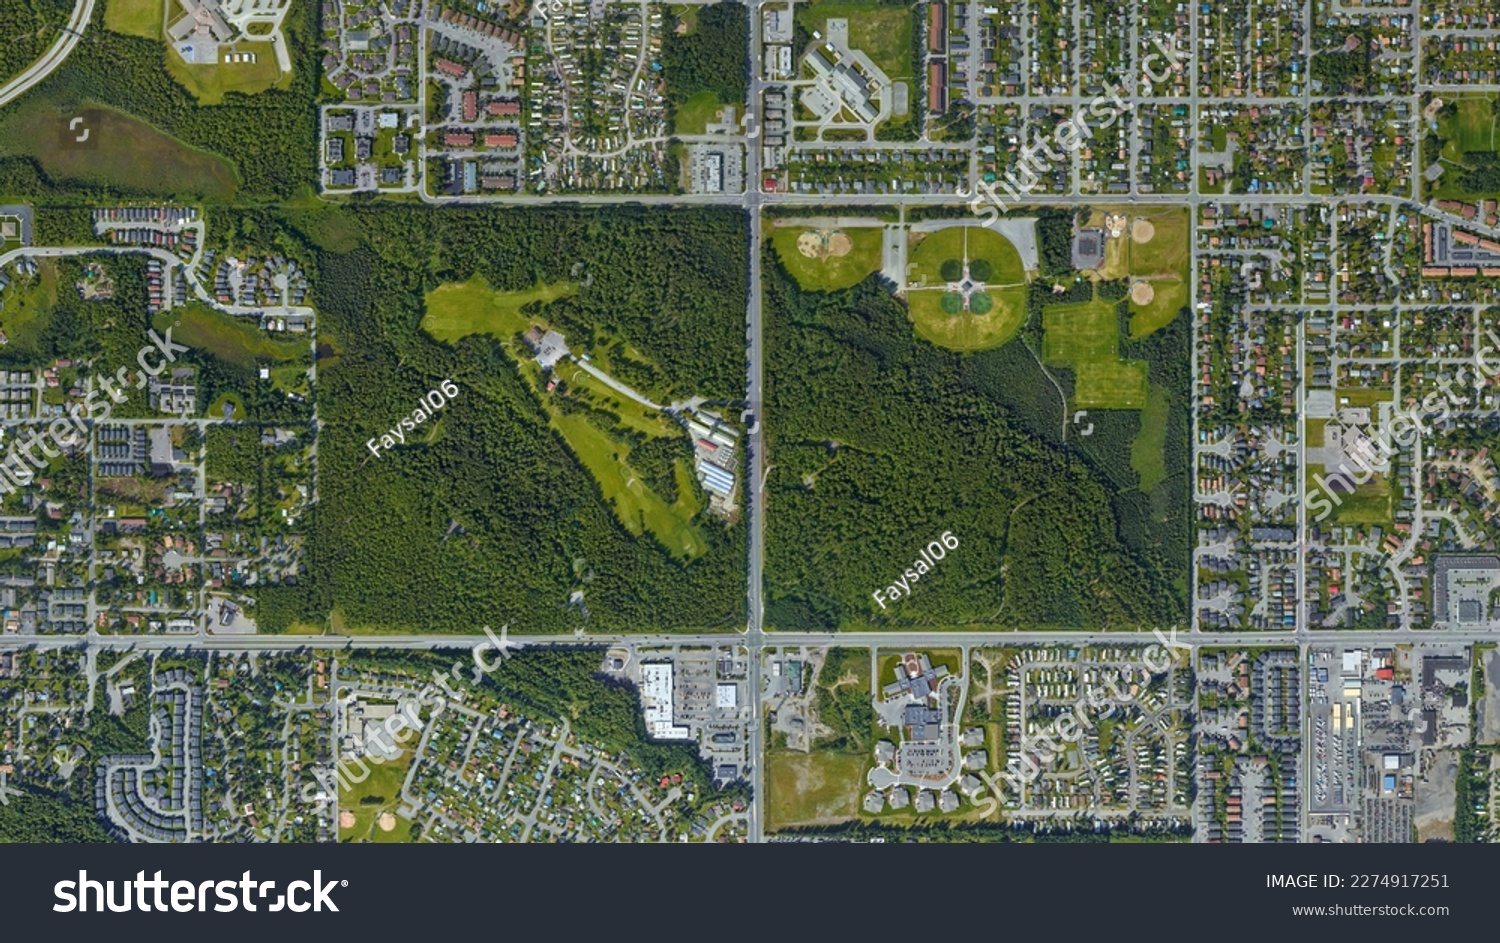 City, Forest and Park, urban forest aerial view, Russian Jack Springs Park, looking down aerial view from above – Bird’s eye view Russian Jack Park, Anchorage, Alaska, USA #2274917251